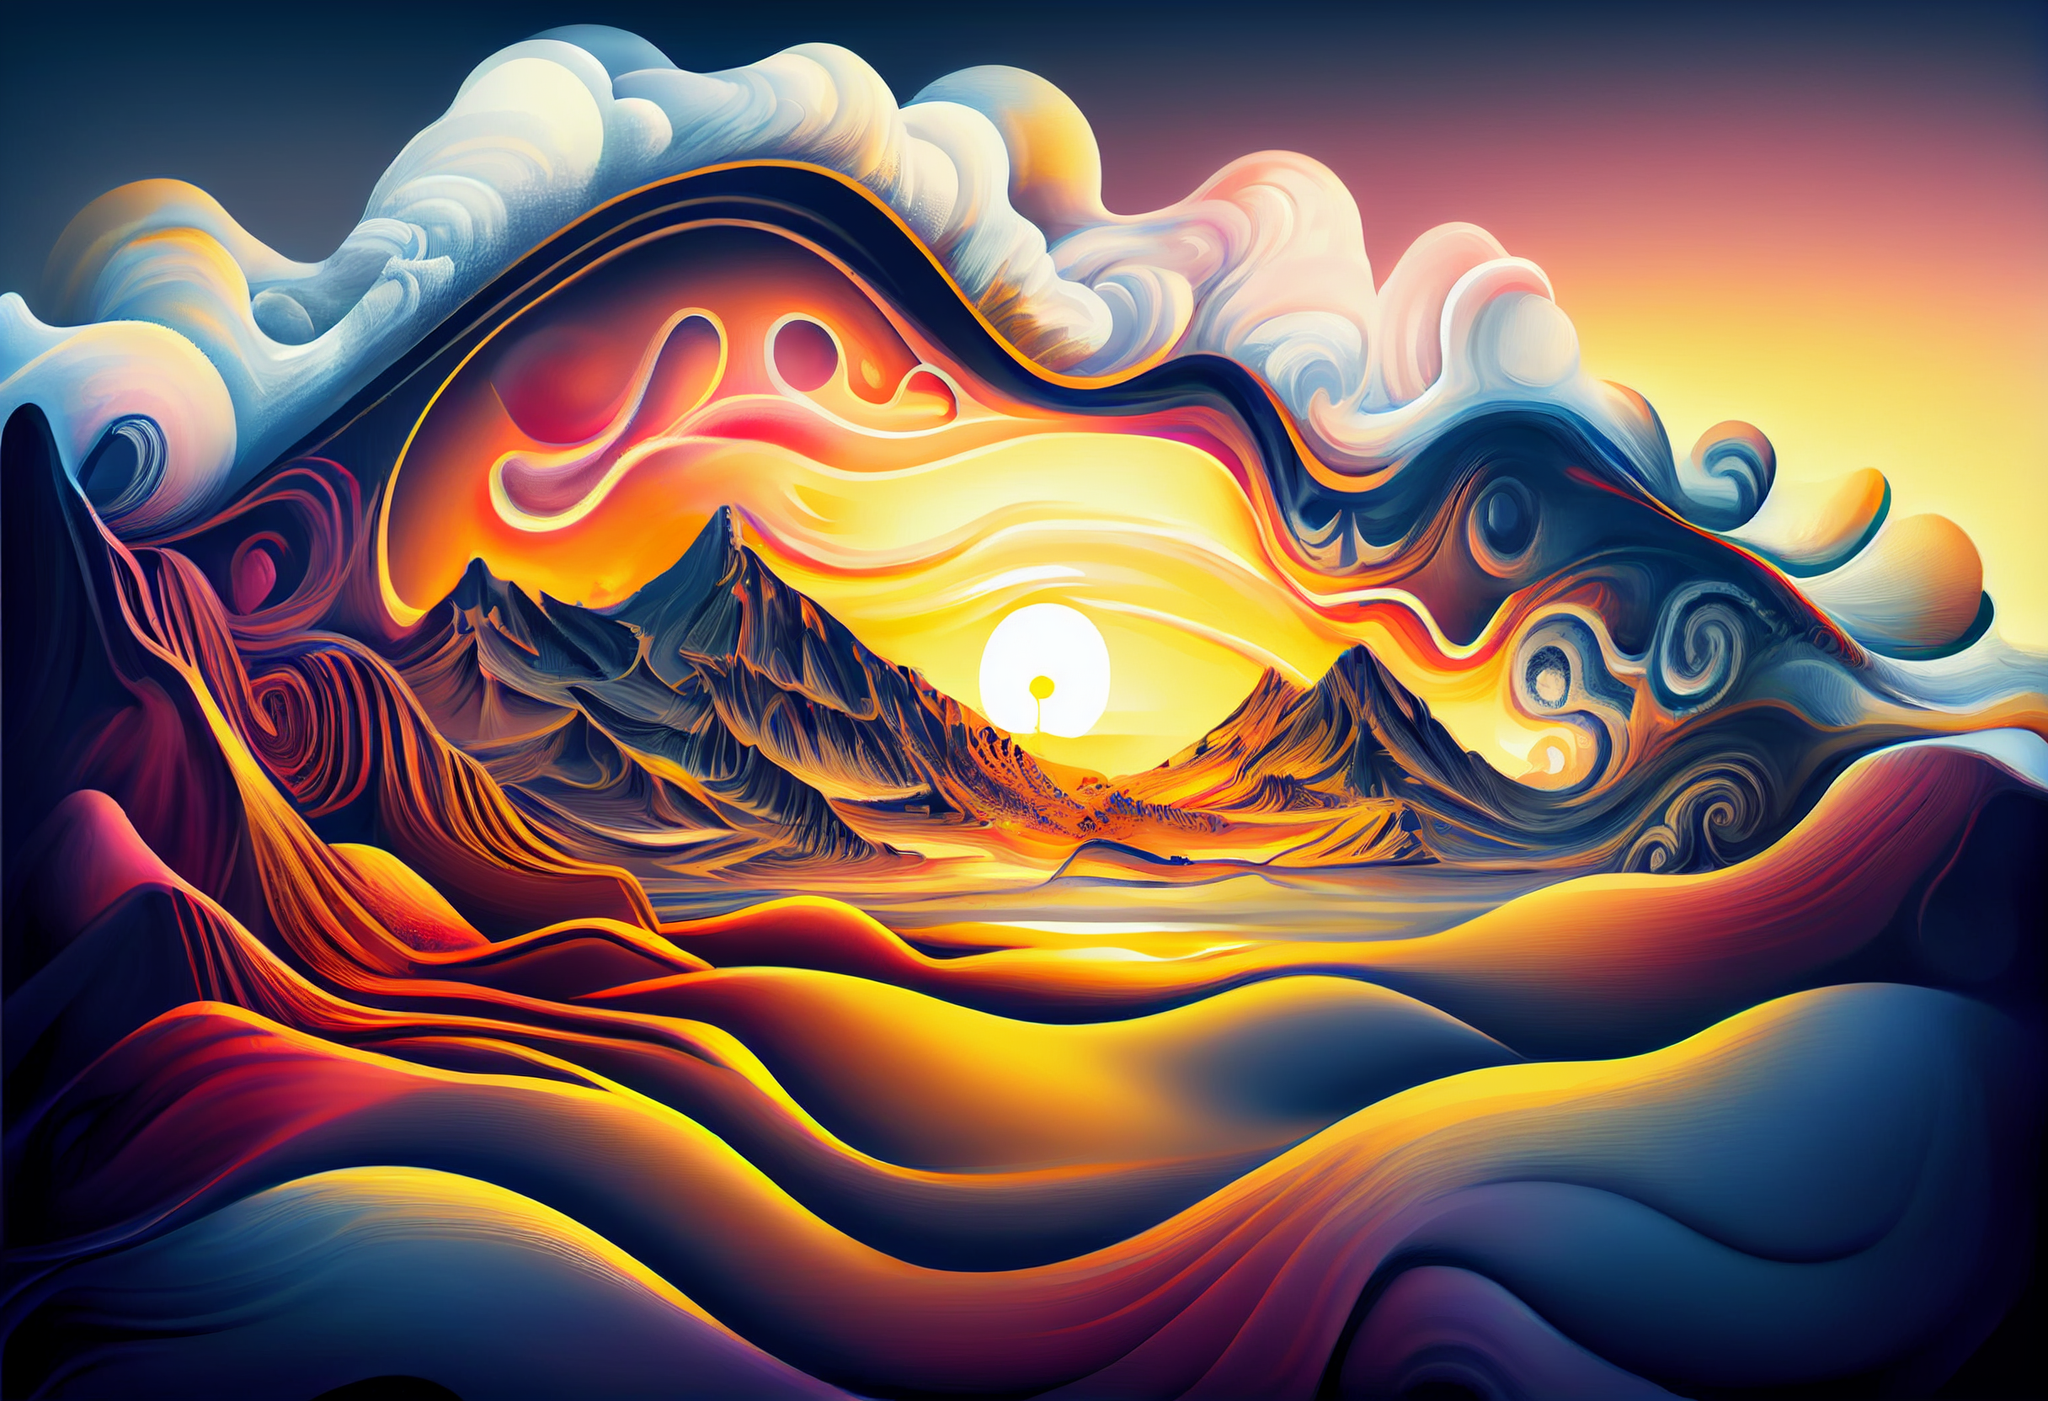 Fluid Sunrise: A Stunning Airbrushed Print of a Beautiful Sunrise with an Ethereal Fluid Art Pattern in the Background